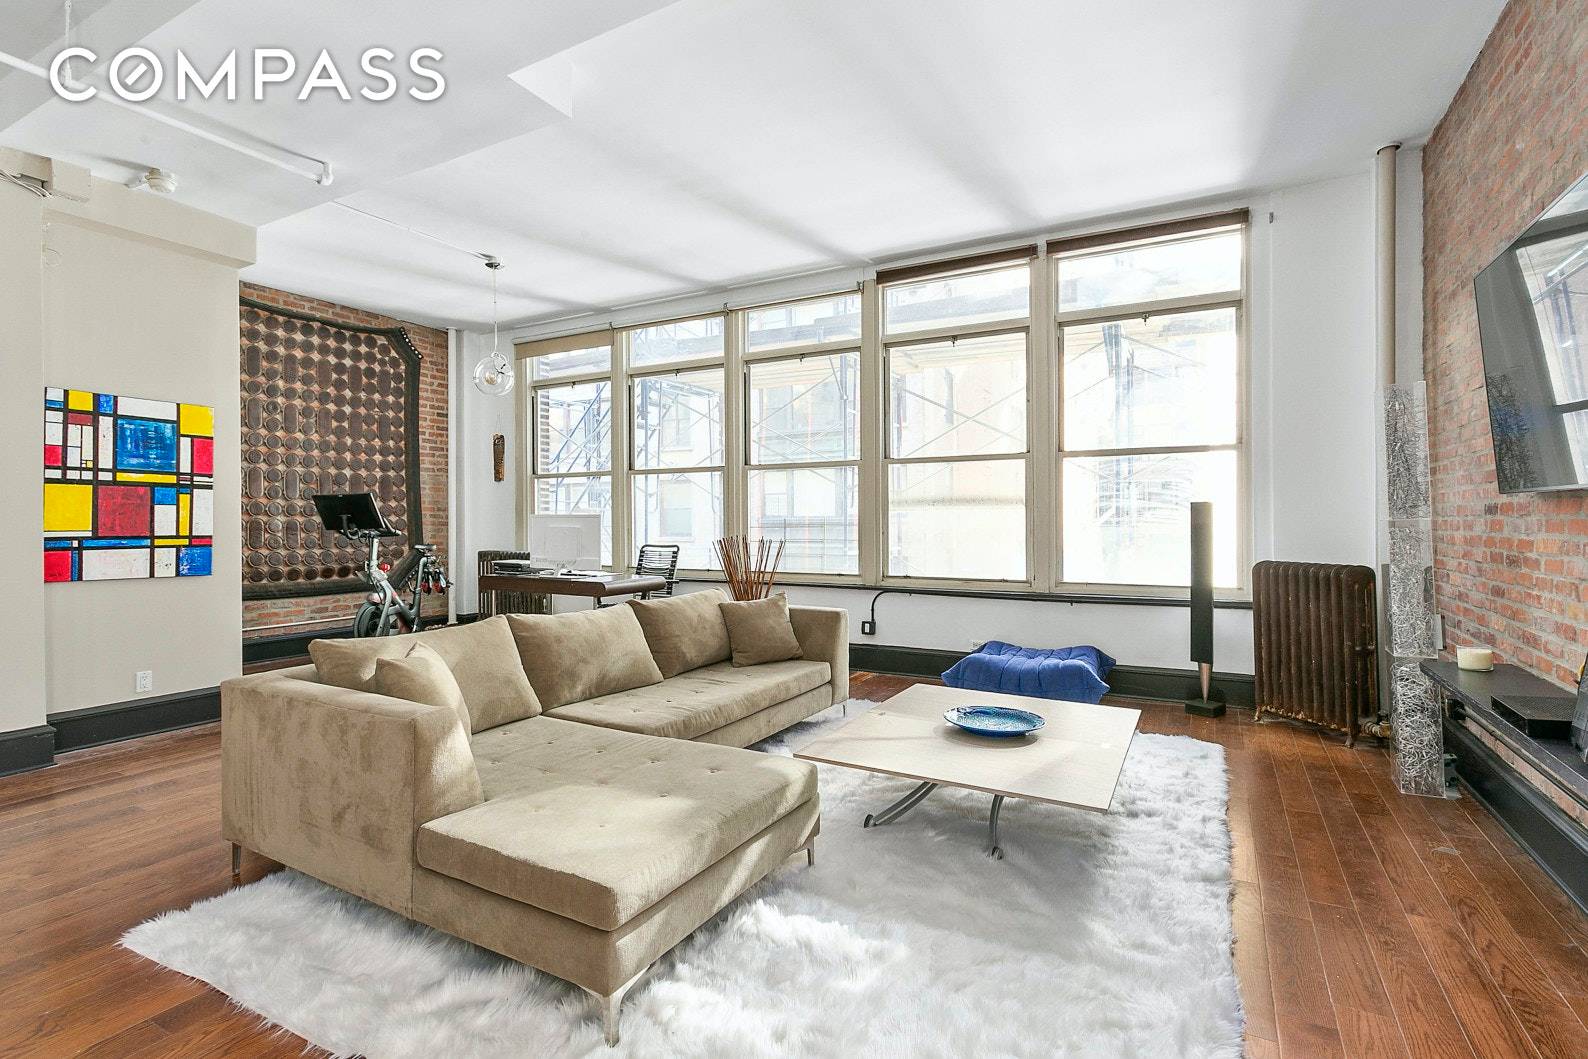 This exceptional full floor loft in Flatiron is a downtown dream home that exudes the authenticity you appreciate, and offers the modern luxuries you desire.